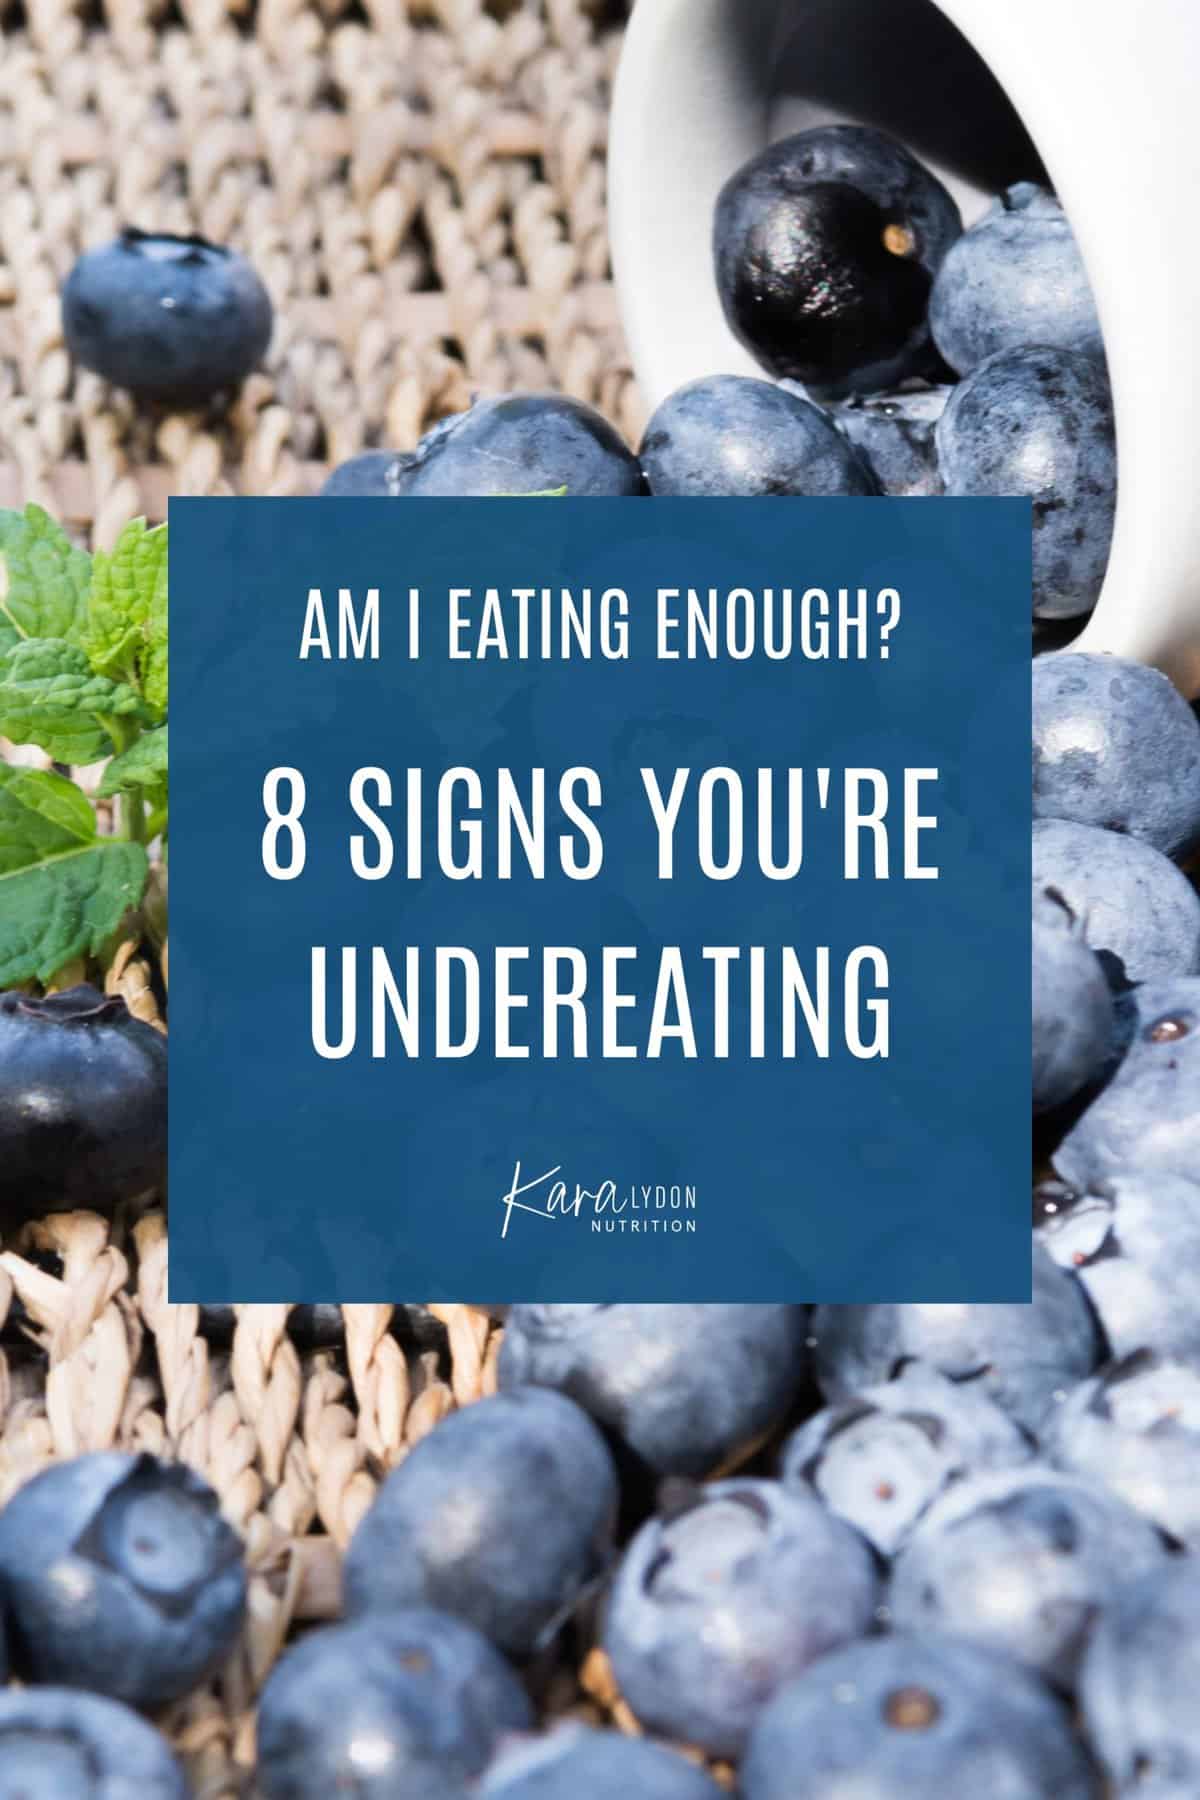 Am I Eating Enough? 8 Signs You’re Undereating